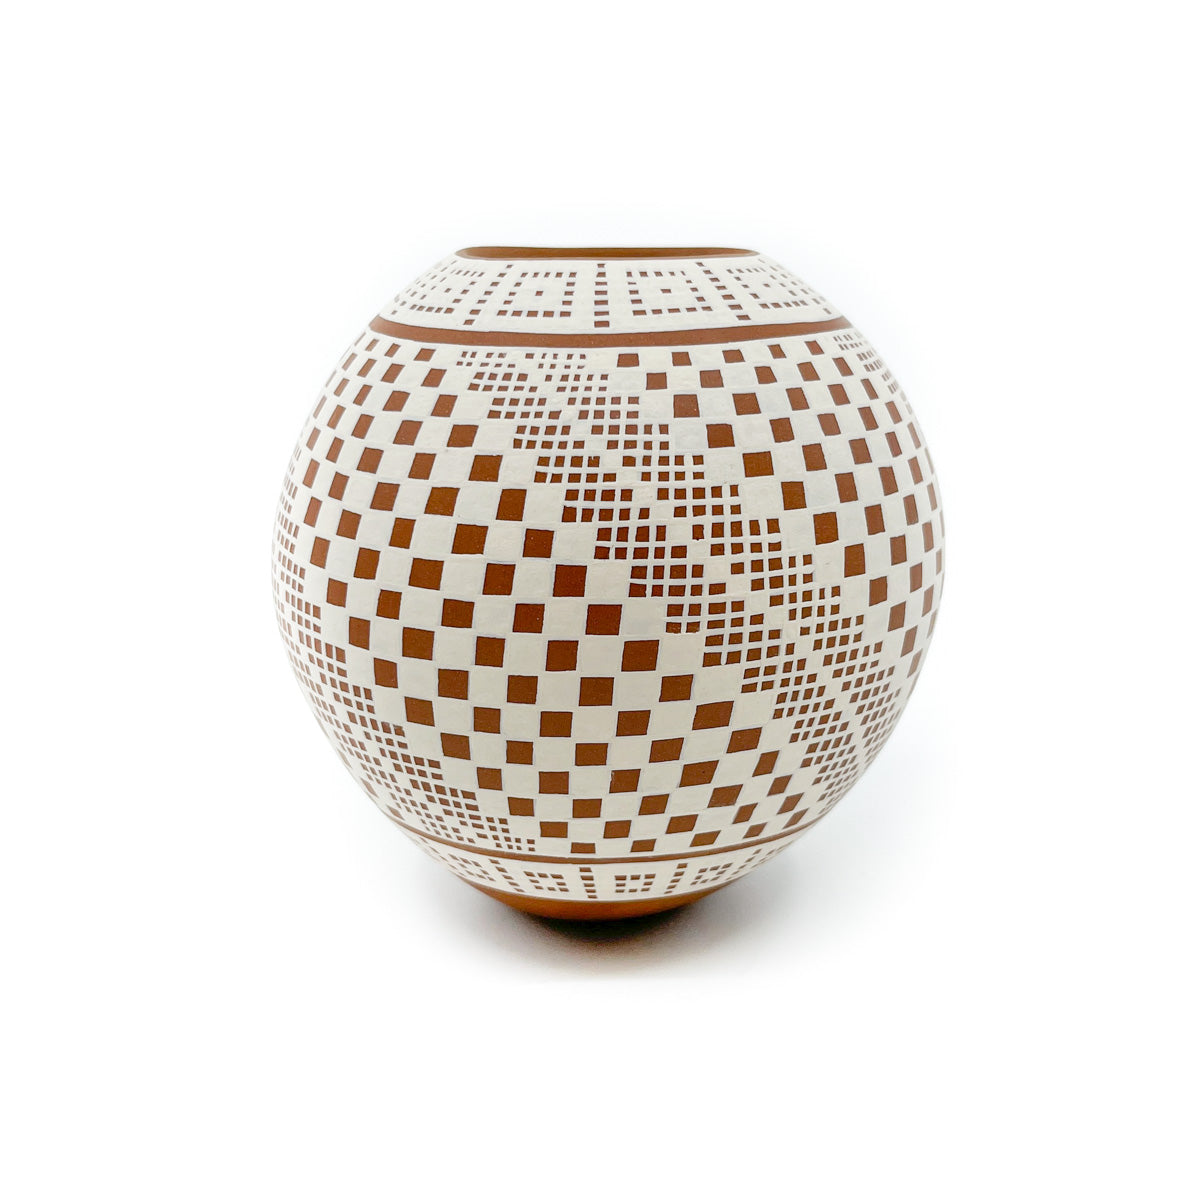 Buff on Brown Pot with Checkerboard Pattern